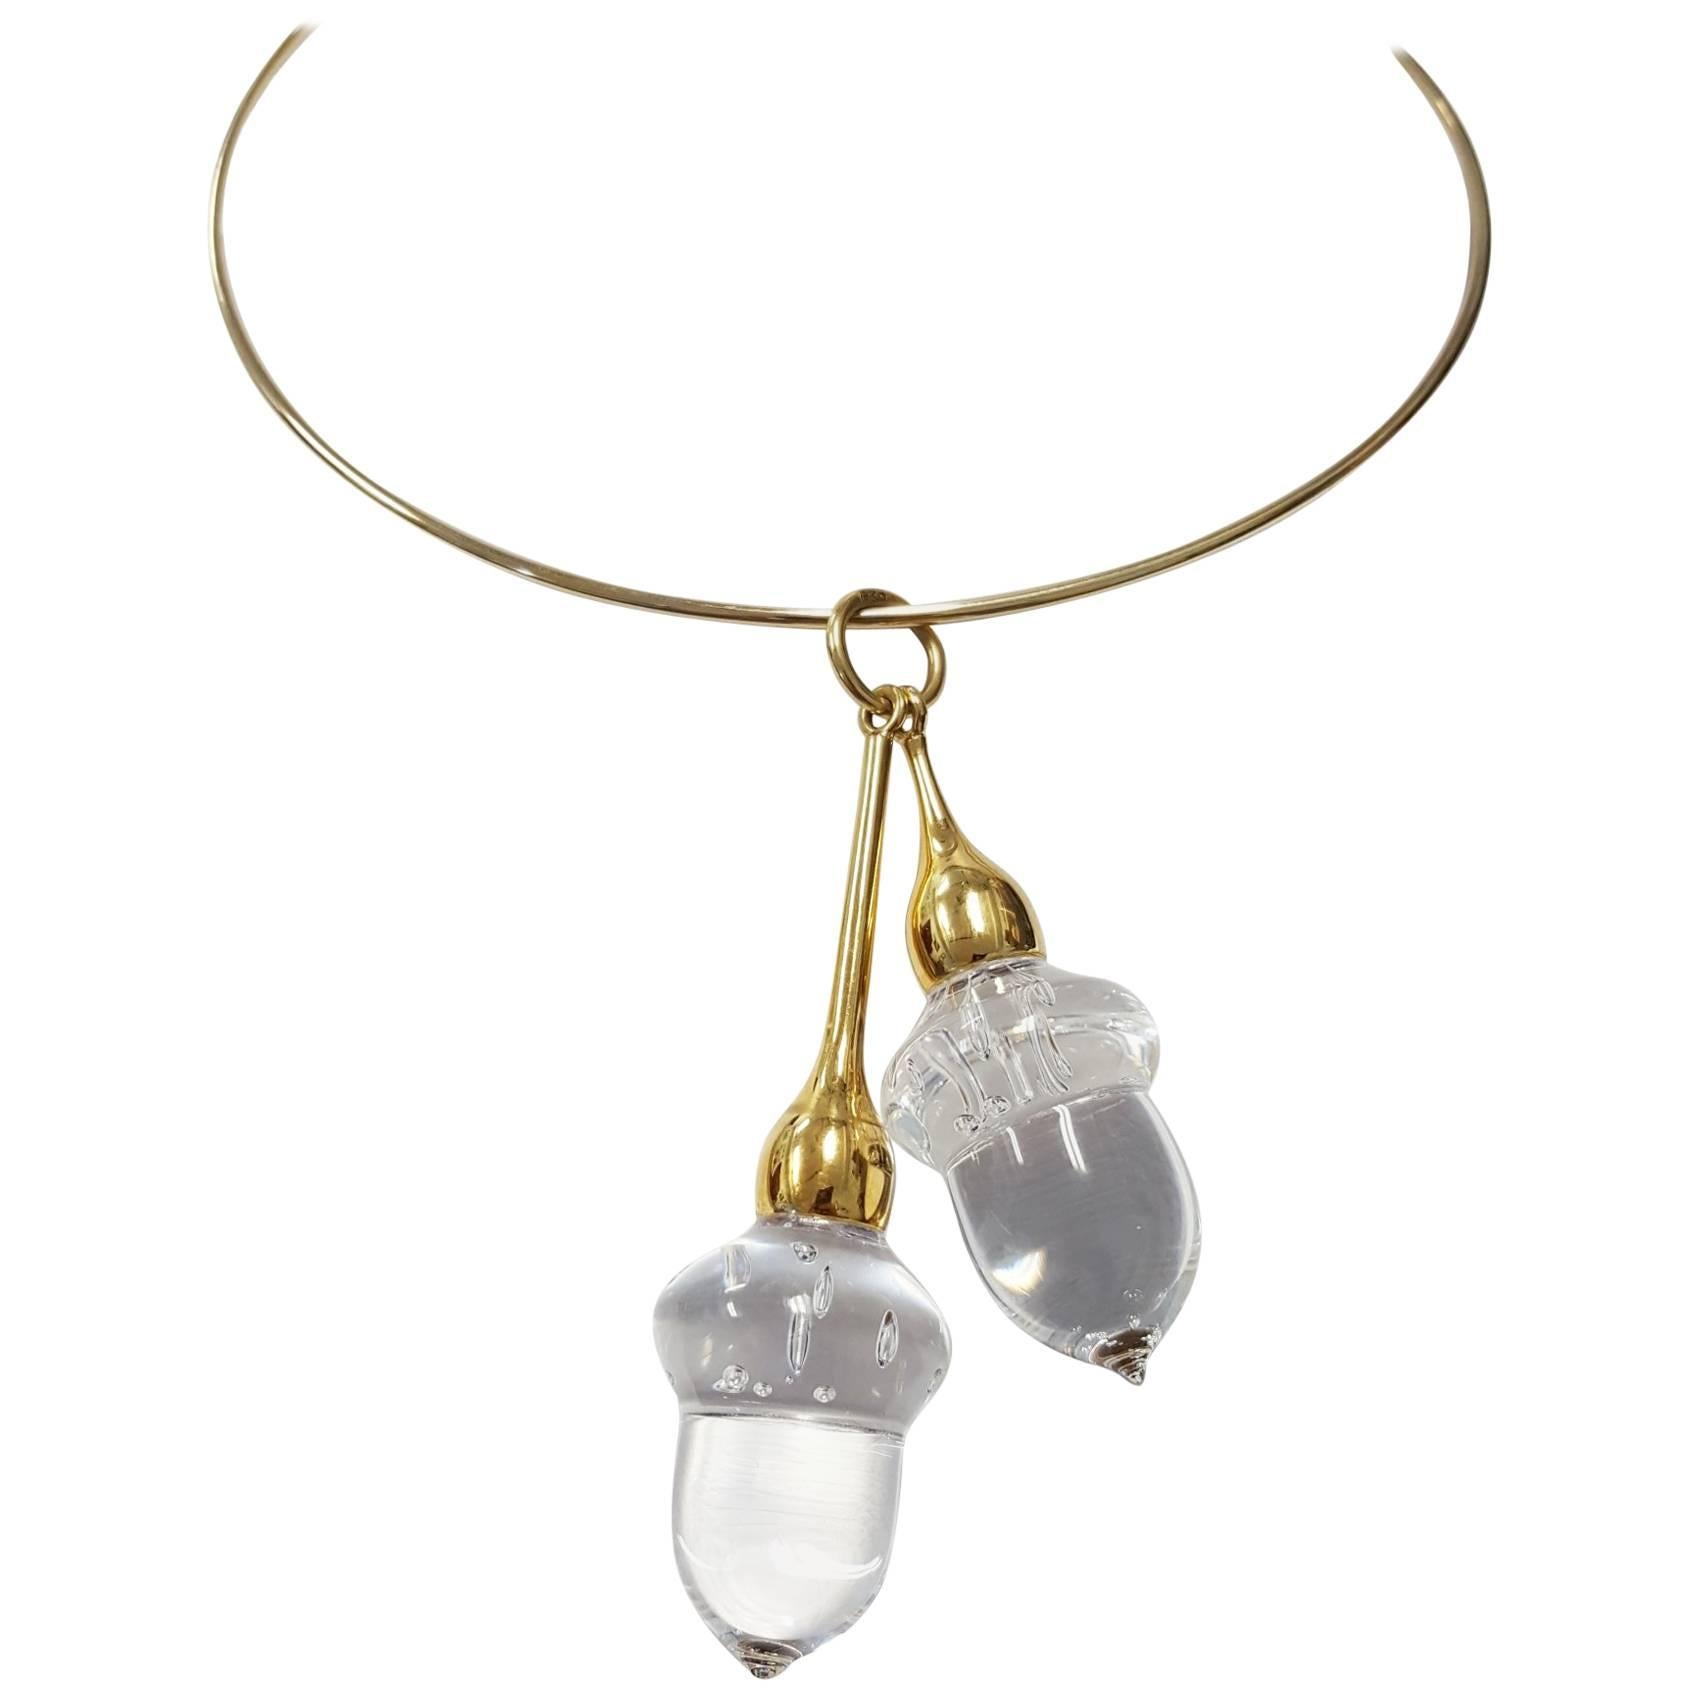 Steuben Crystal and Gold Necklace